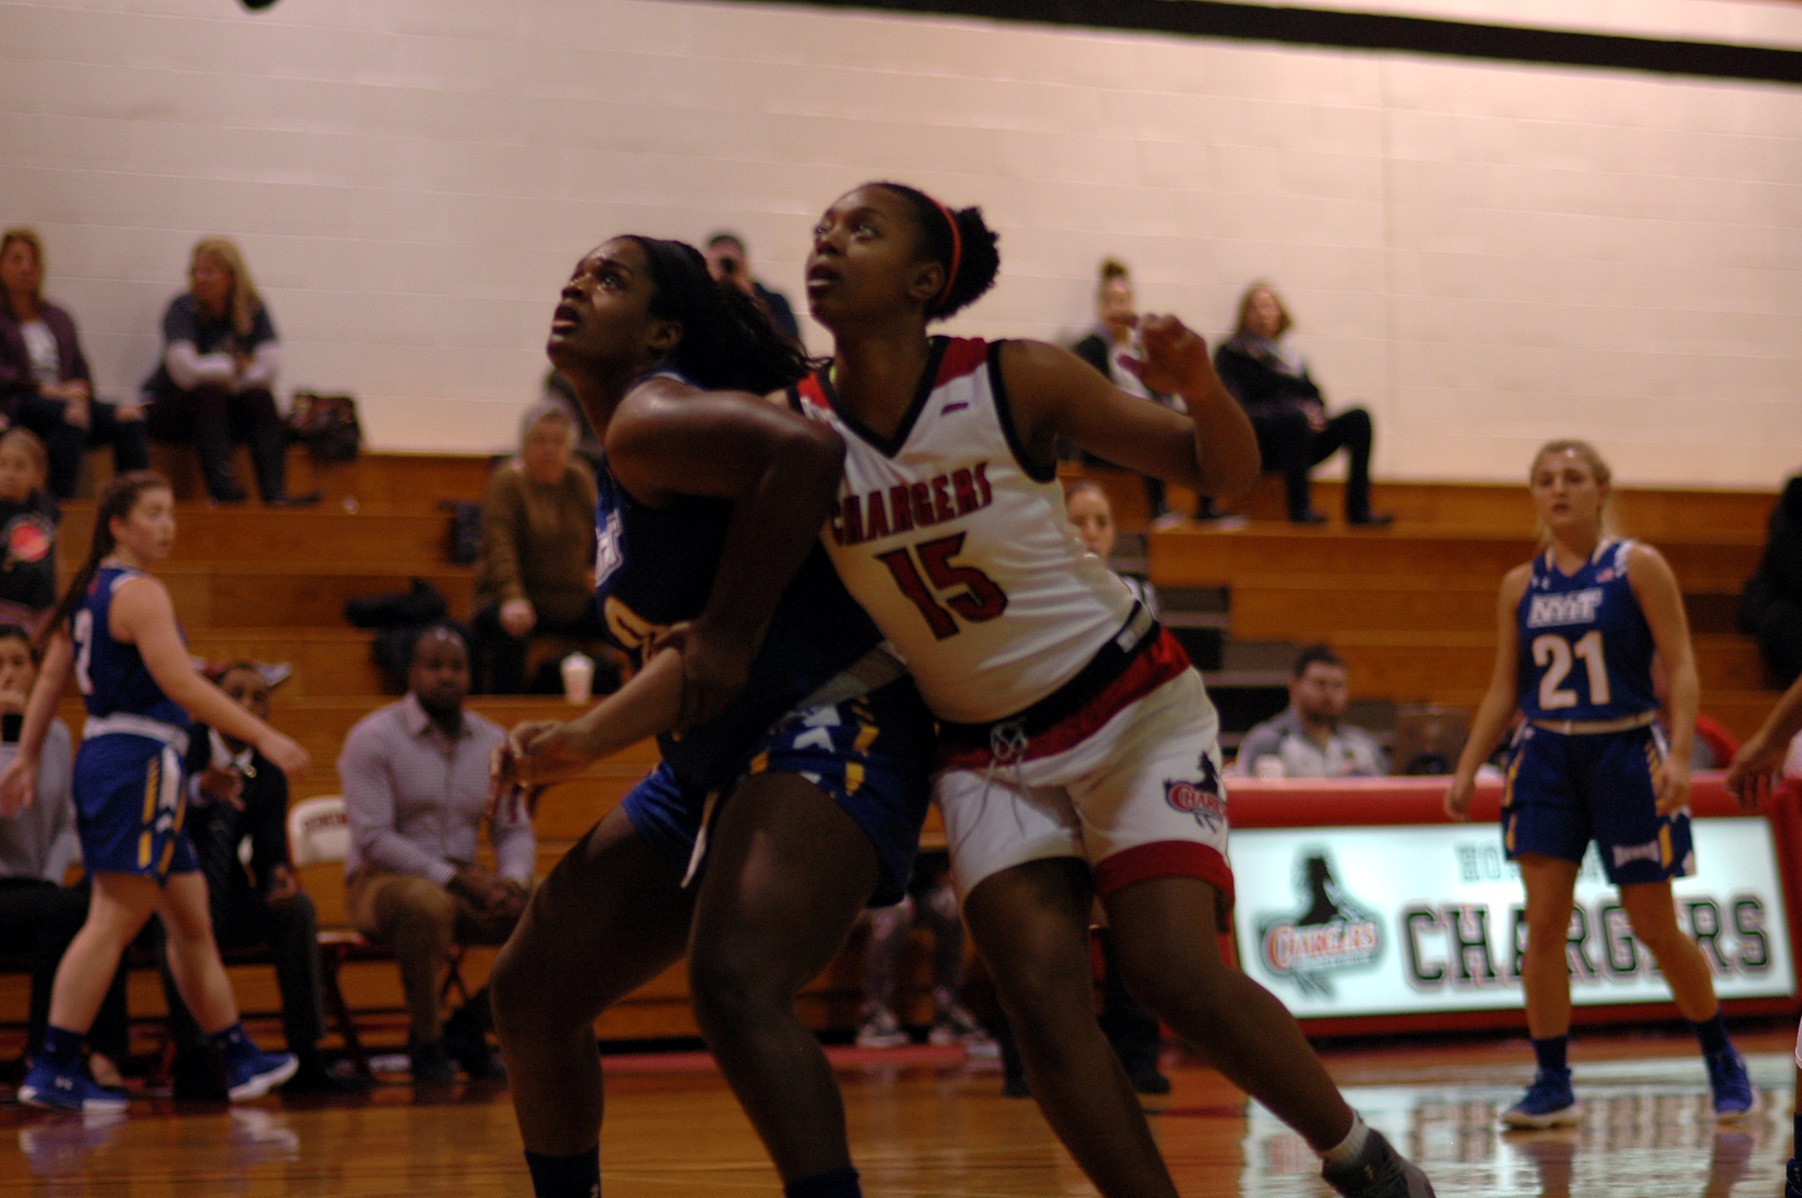 LADY CHARGERS REMAIN WINLESS AFTER LOSS TO QUEENS COLLEGE